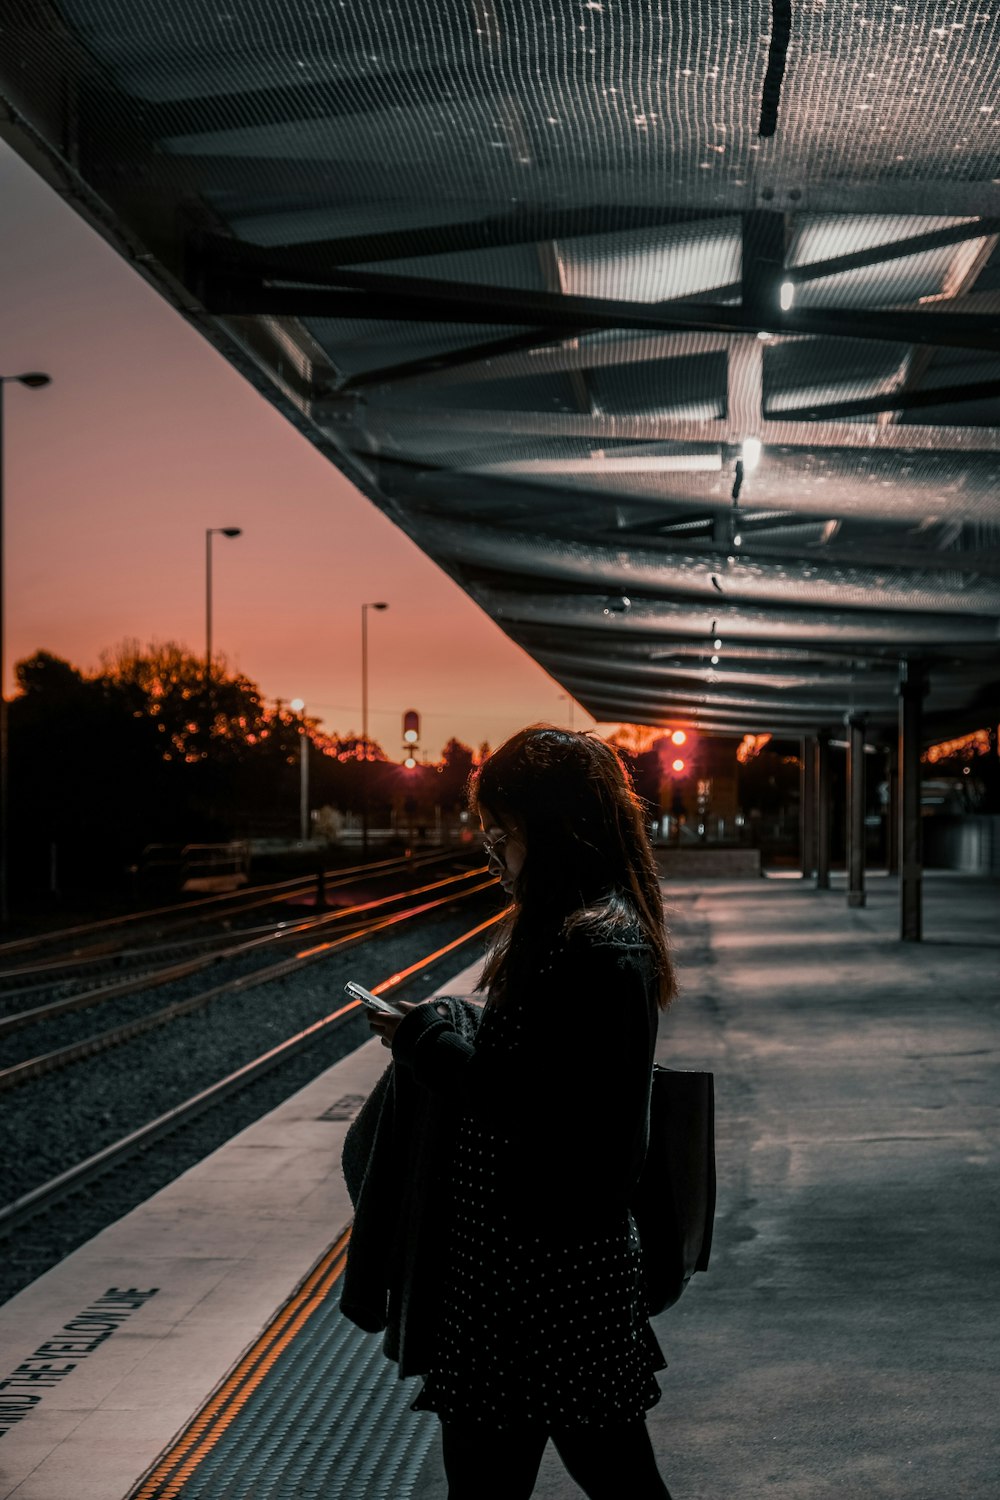 a person standing on a train platform